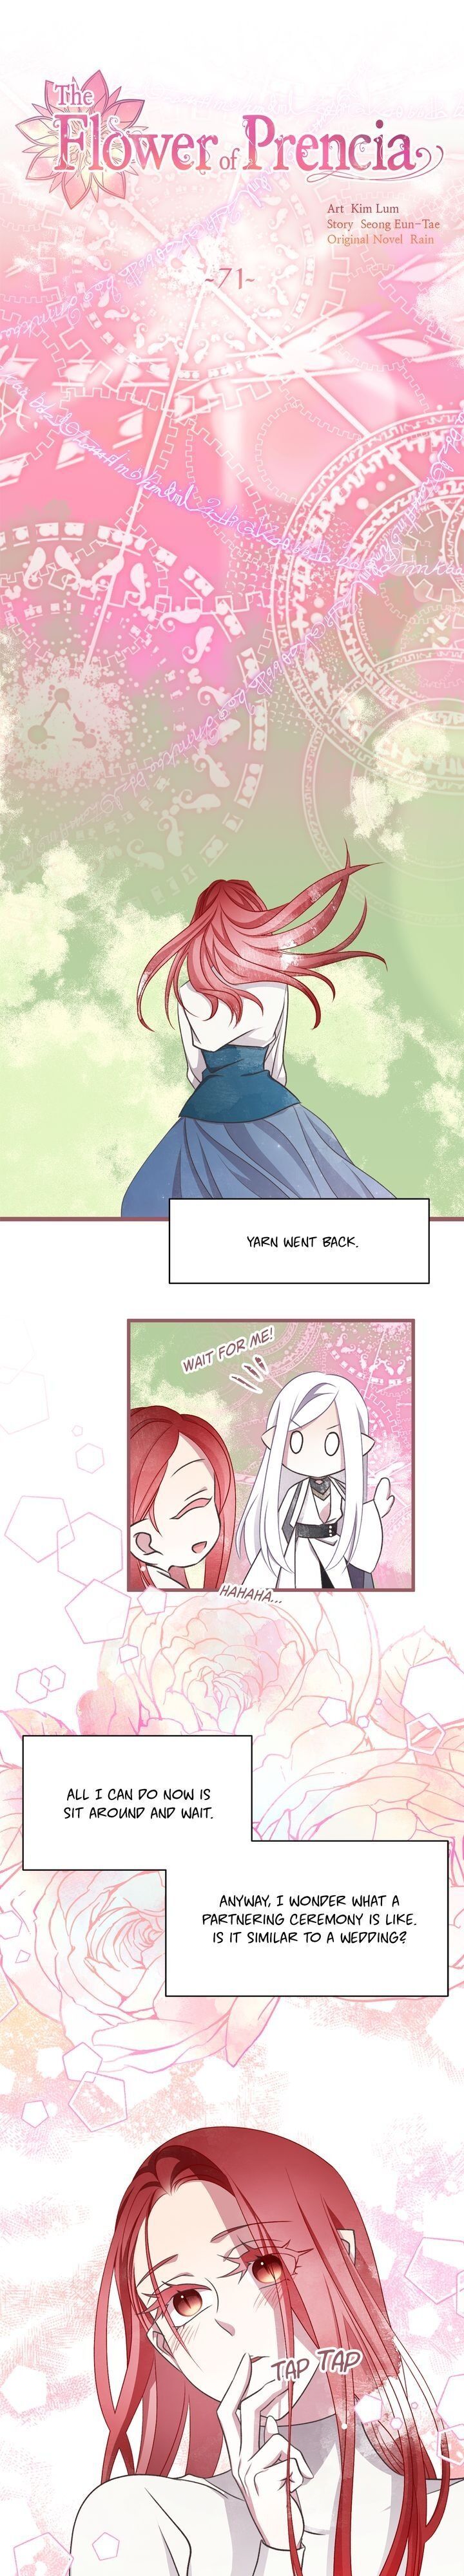 The Flower of Francia Chapter 71 page 13